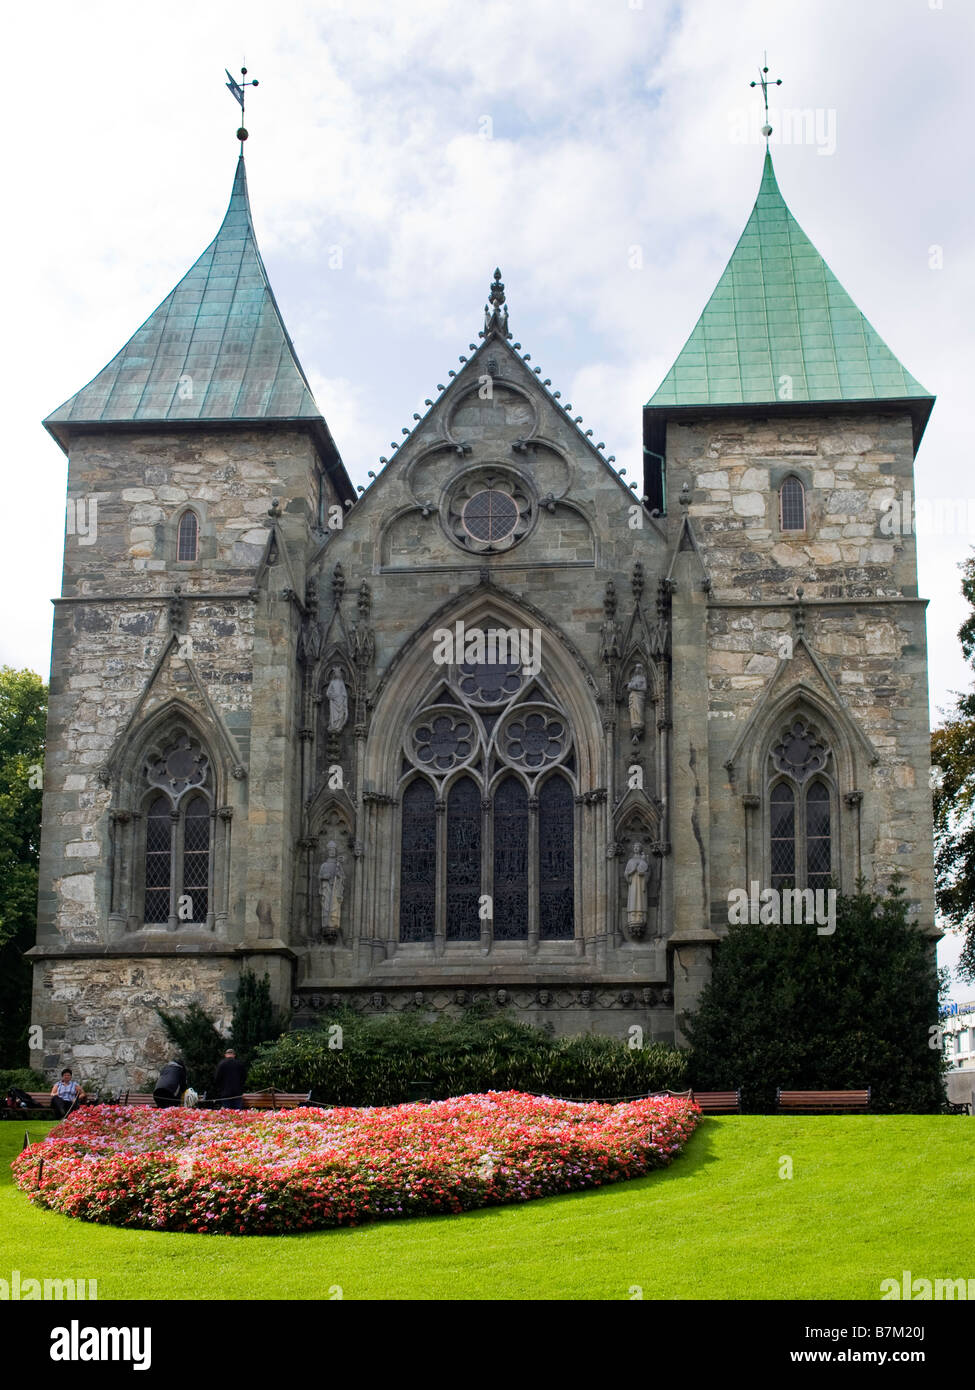 Domkirke of Stavanger, St. Svithun's Cathedral (c. 1150), is the oldest cathedral in Norway. Stock Photo